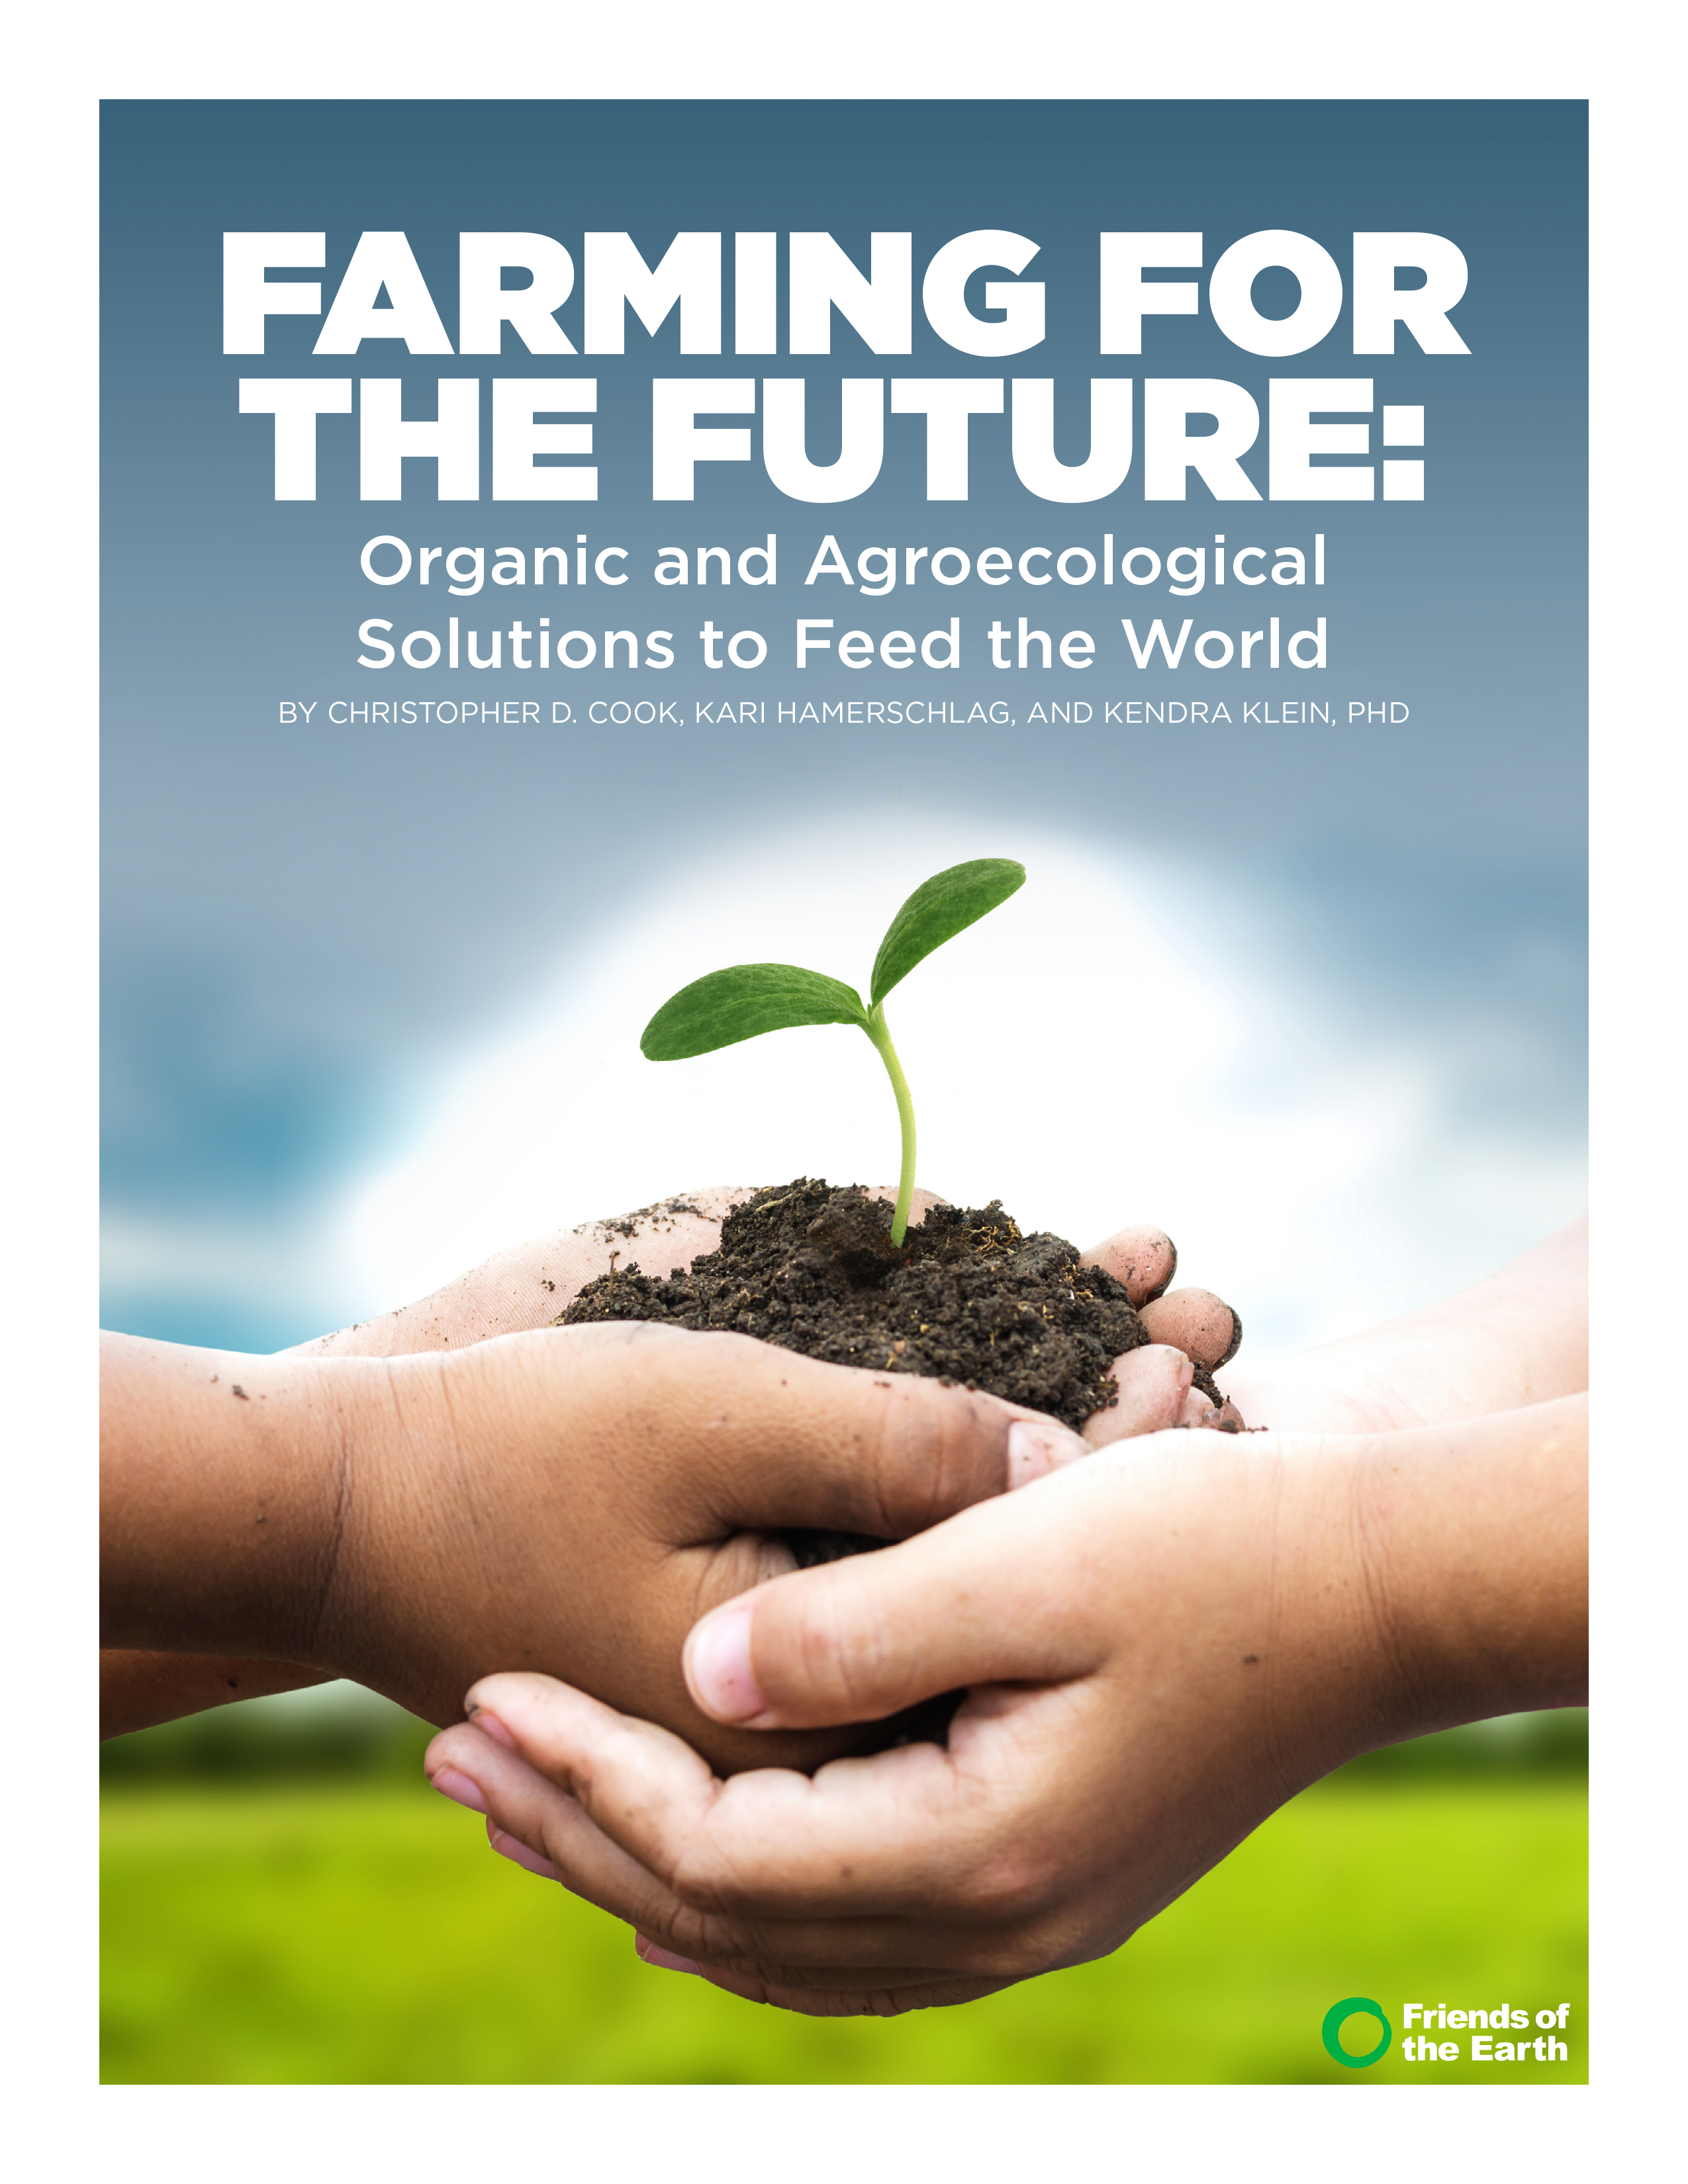 Farming for the Future: Organic and Agroecological Solutions to Feed the World